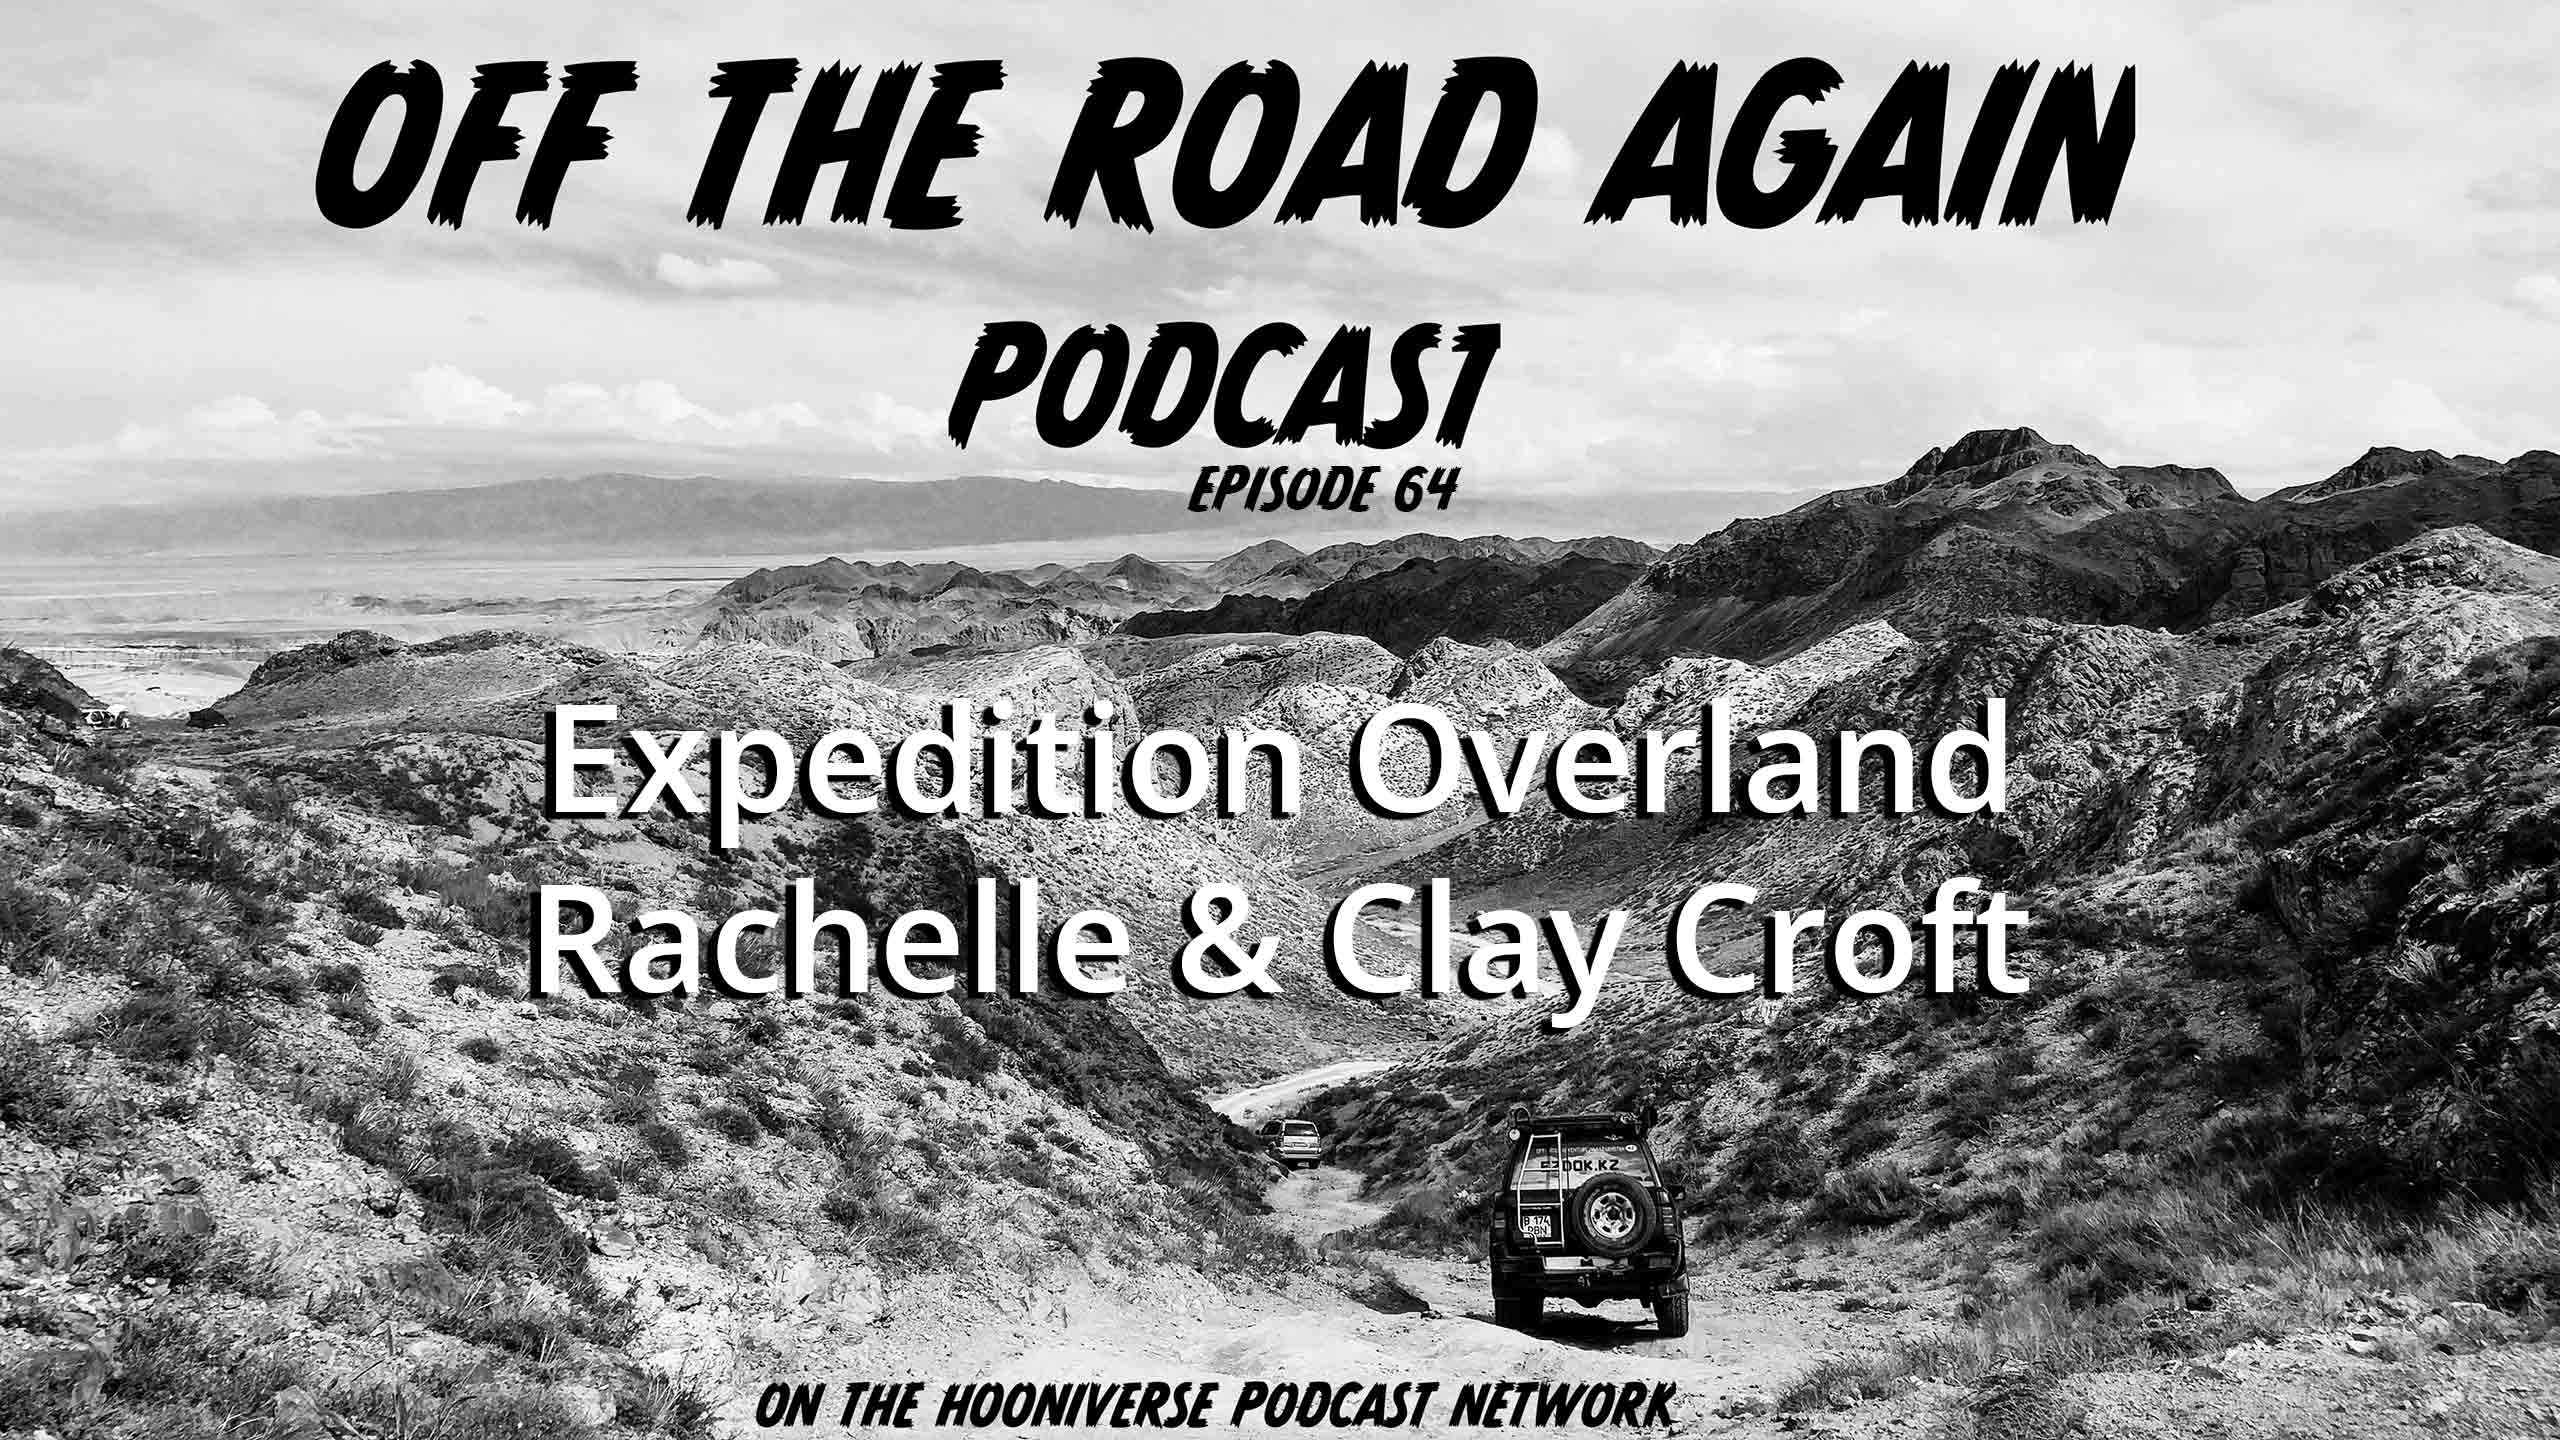 Expedition-Overland-Off-The-Road-Again-Podcast-Episode-64